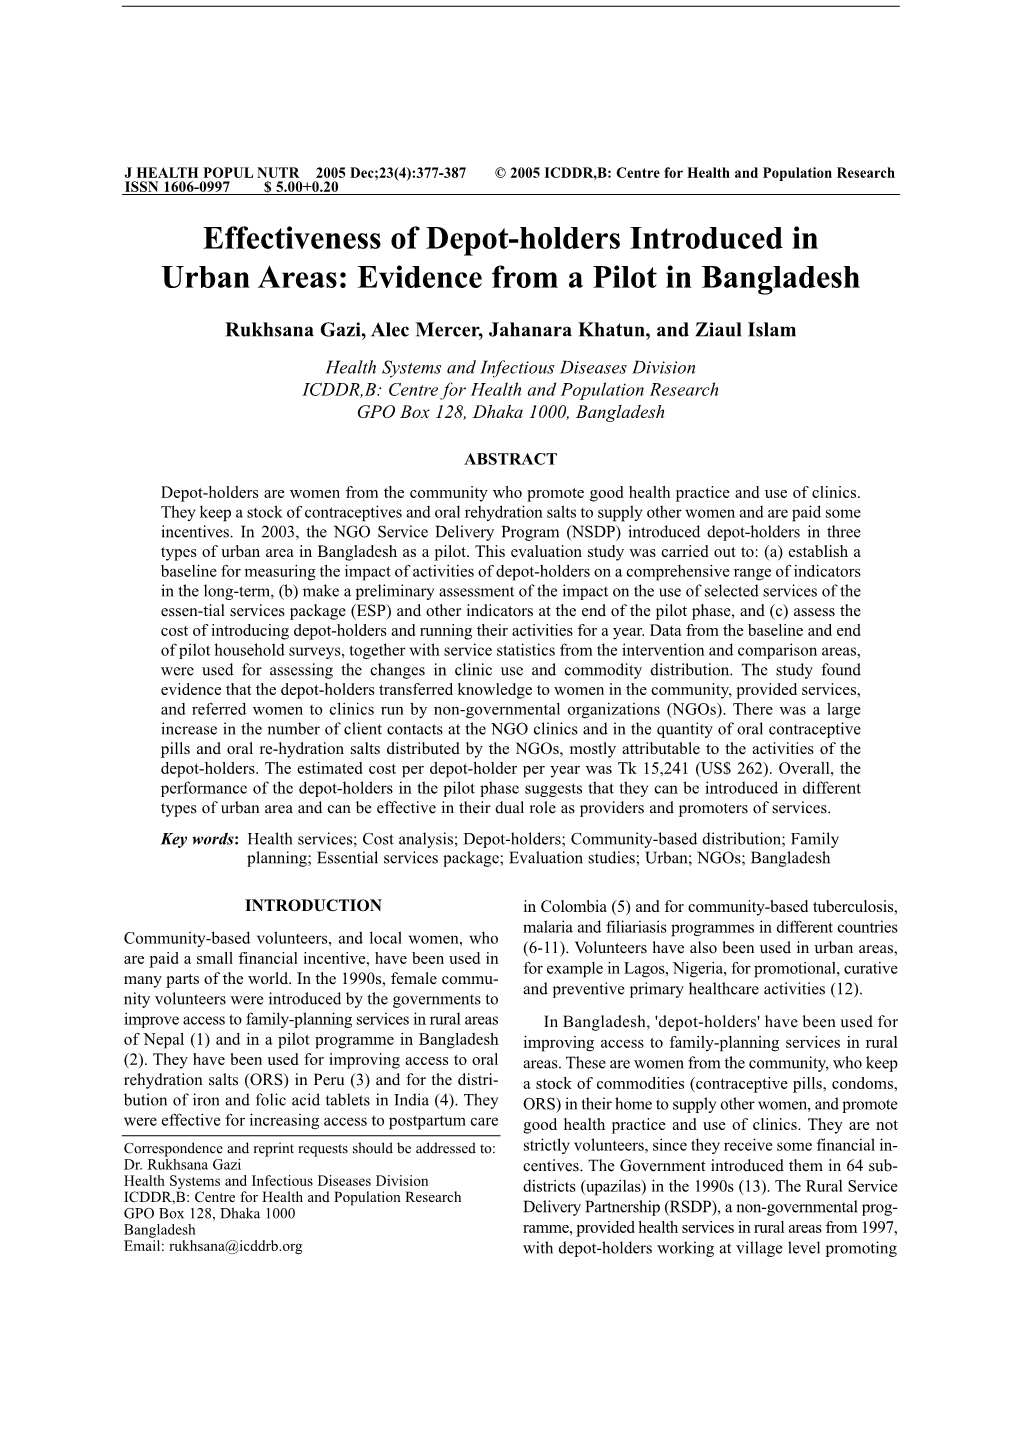 Effectiveness of Depot-Holders Introduced in Urban Areas: Evidence from a Pilot in Bangladesh